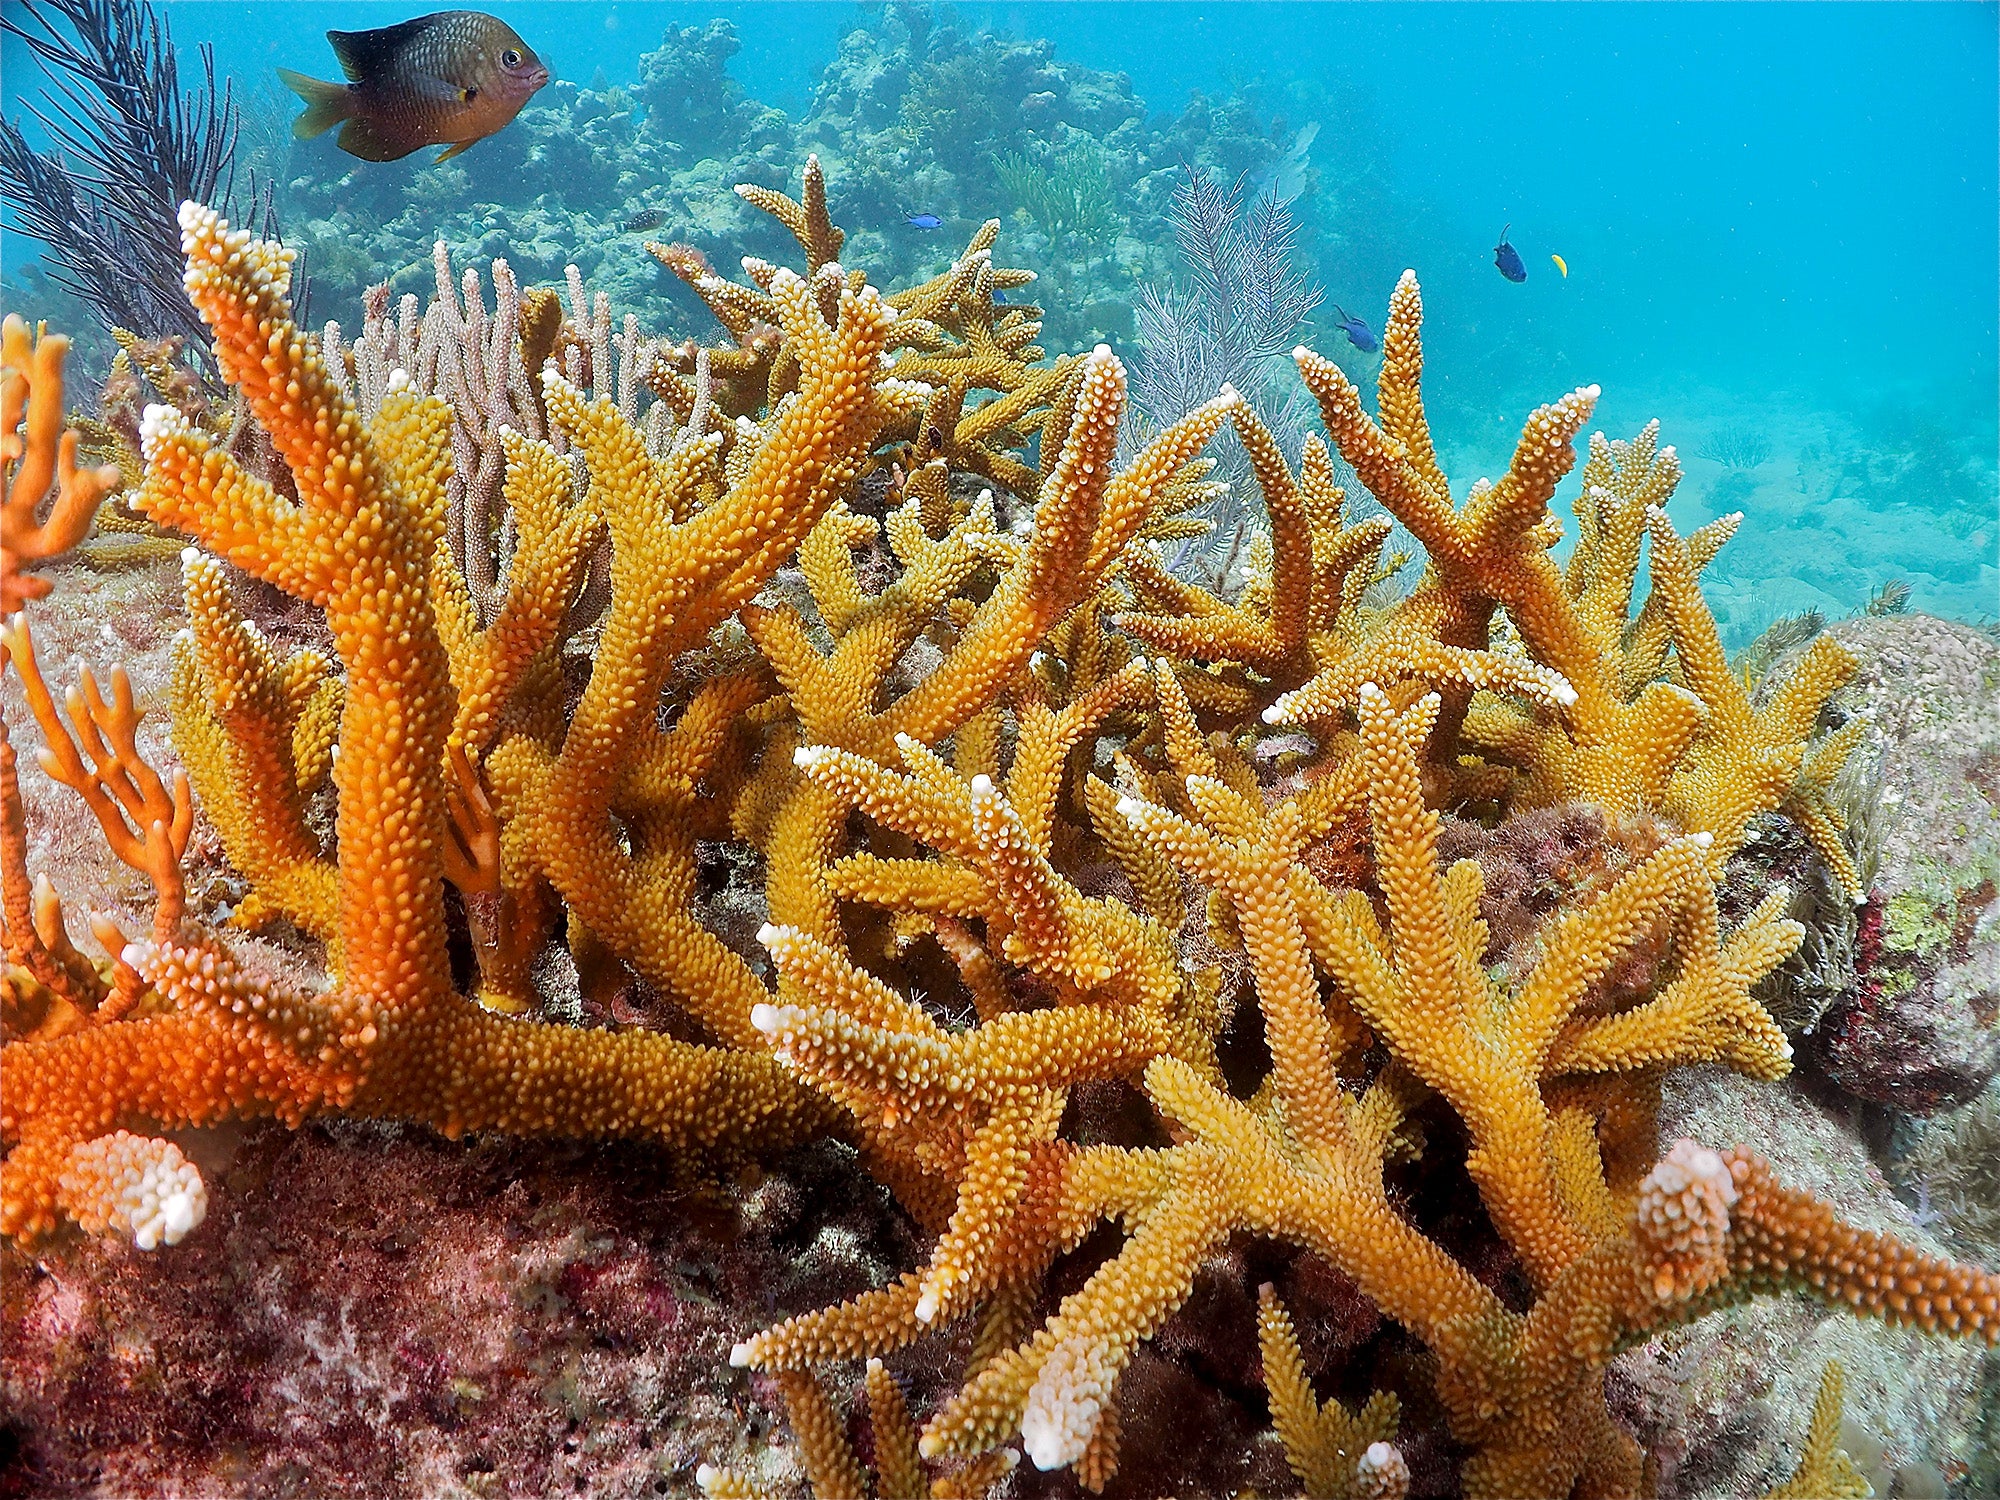 Orange coral, looking like a tree branch, growing in blue water with fish swimming nearby.